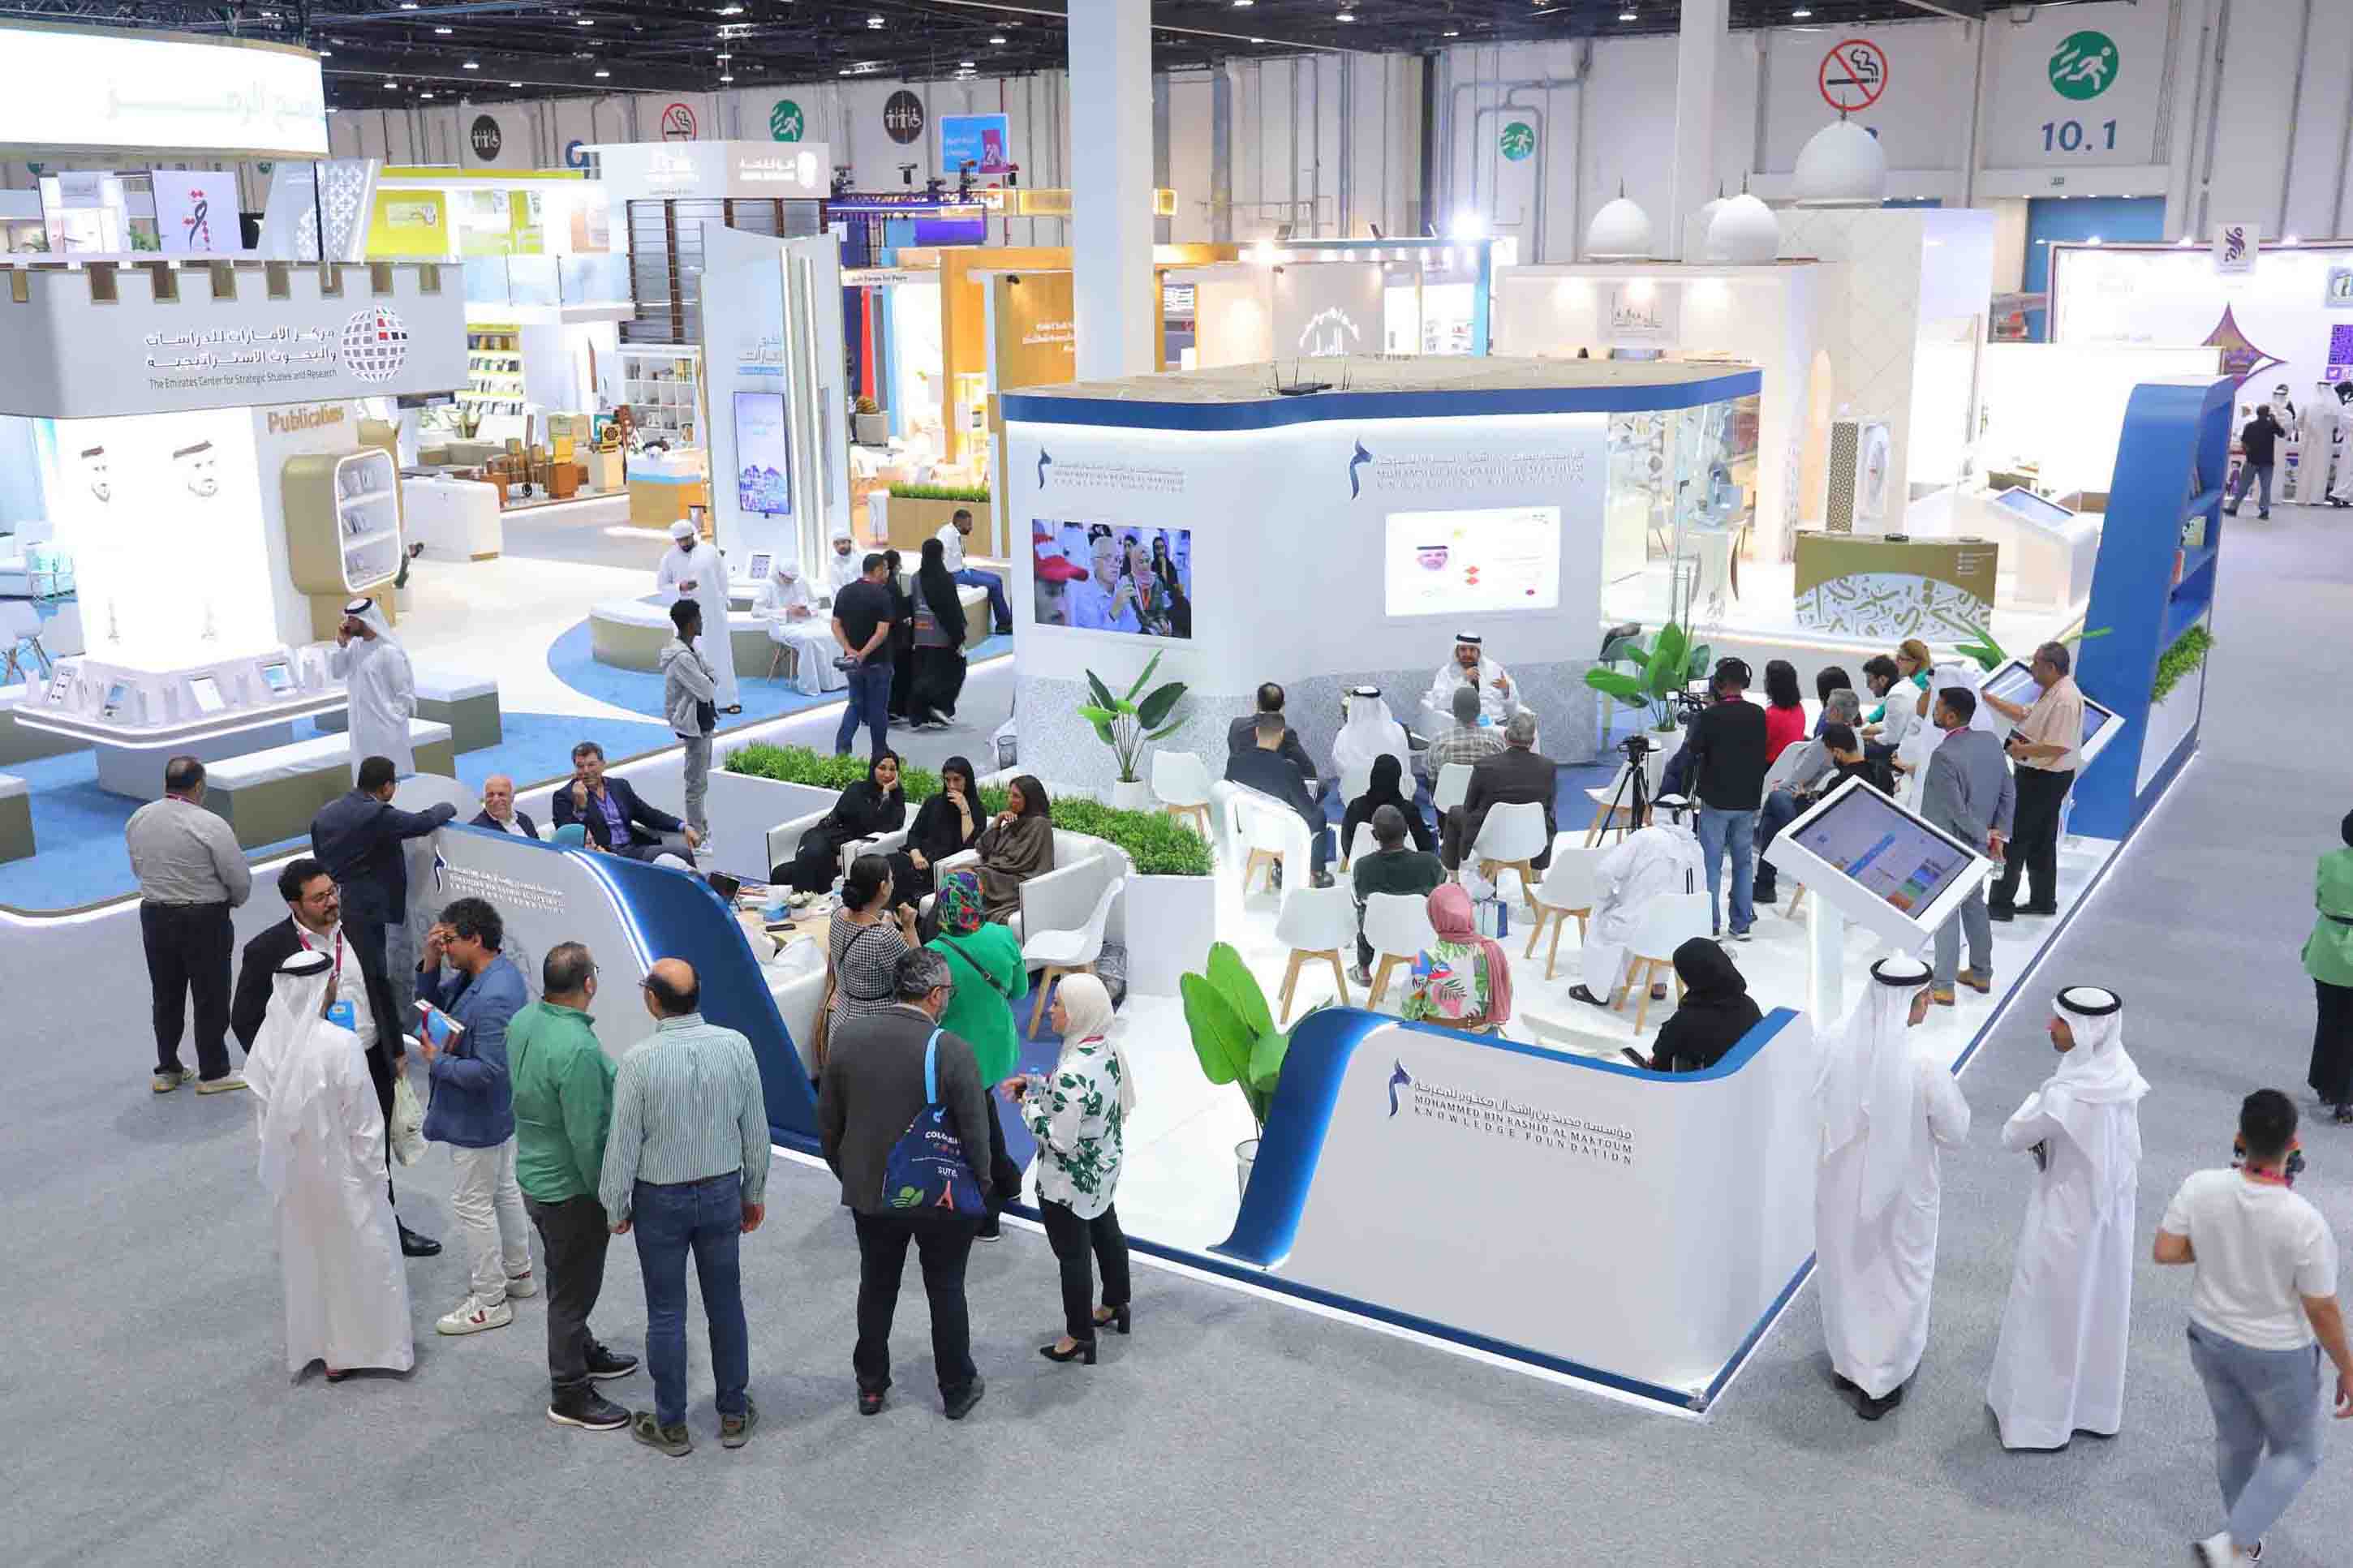 MBRF Presents Valuable Knowledge Insights During 3rd And 4th Days Of Abu Dhabi International Book Fair